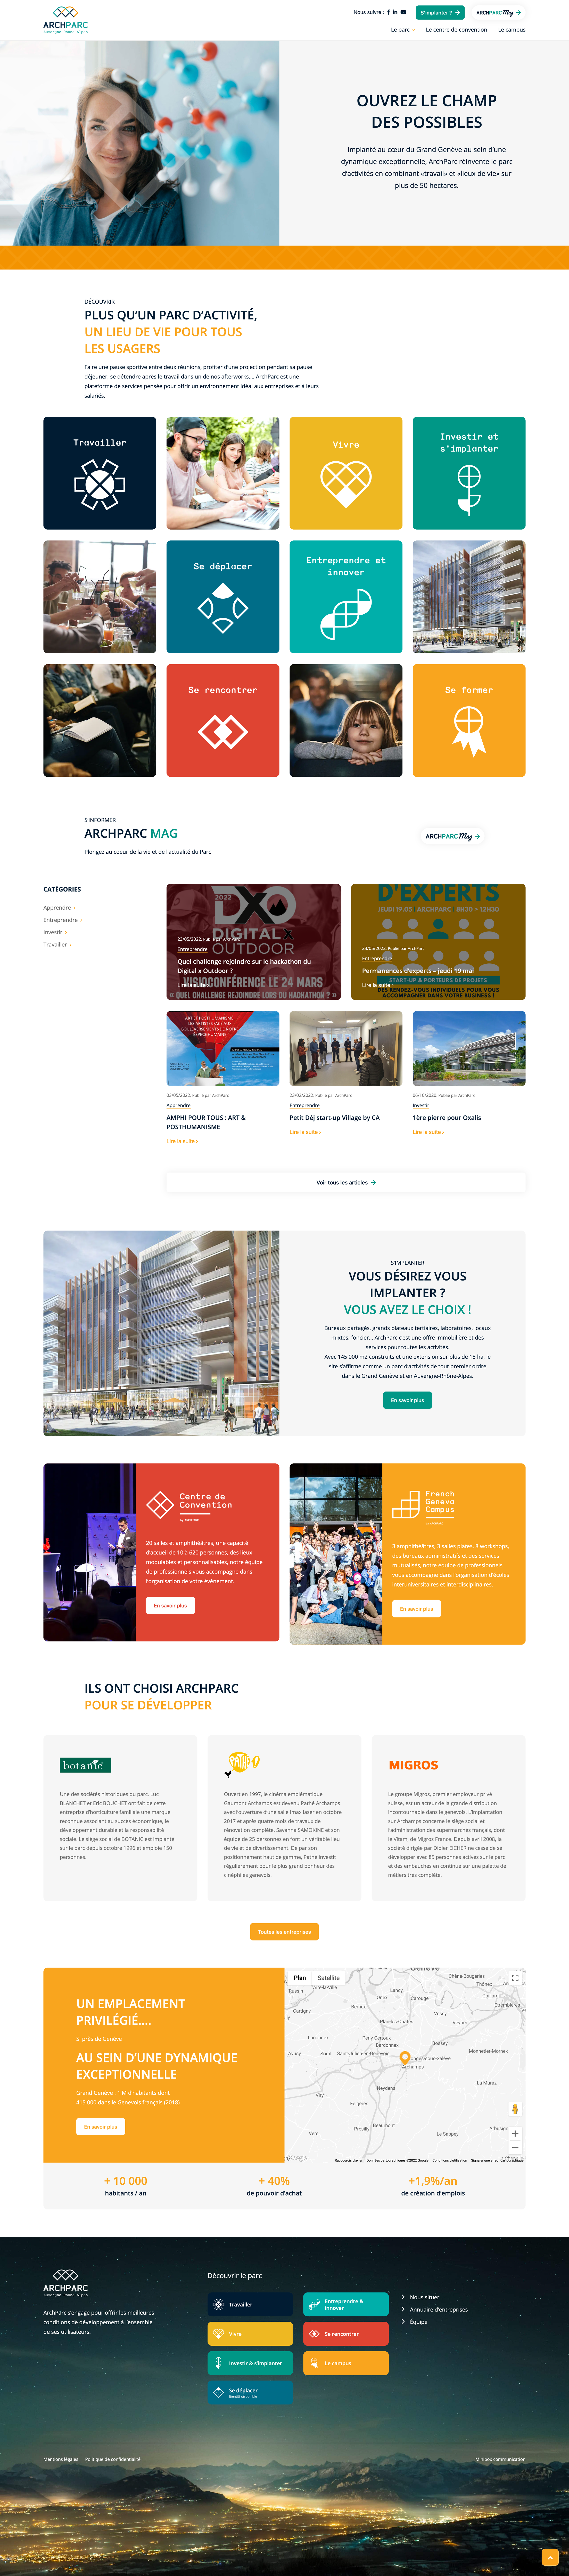 Archparc-homepage